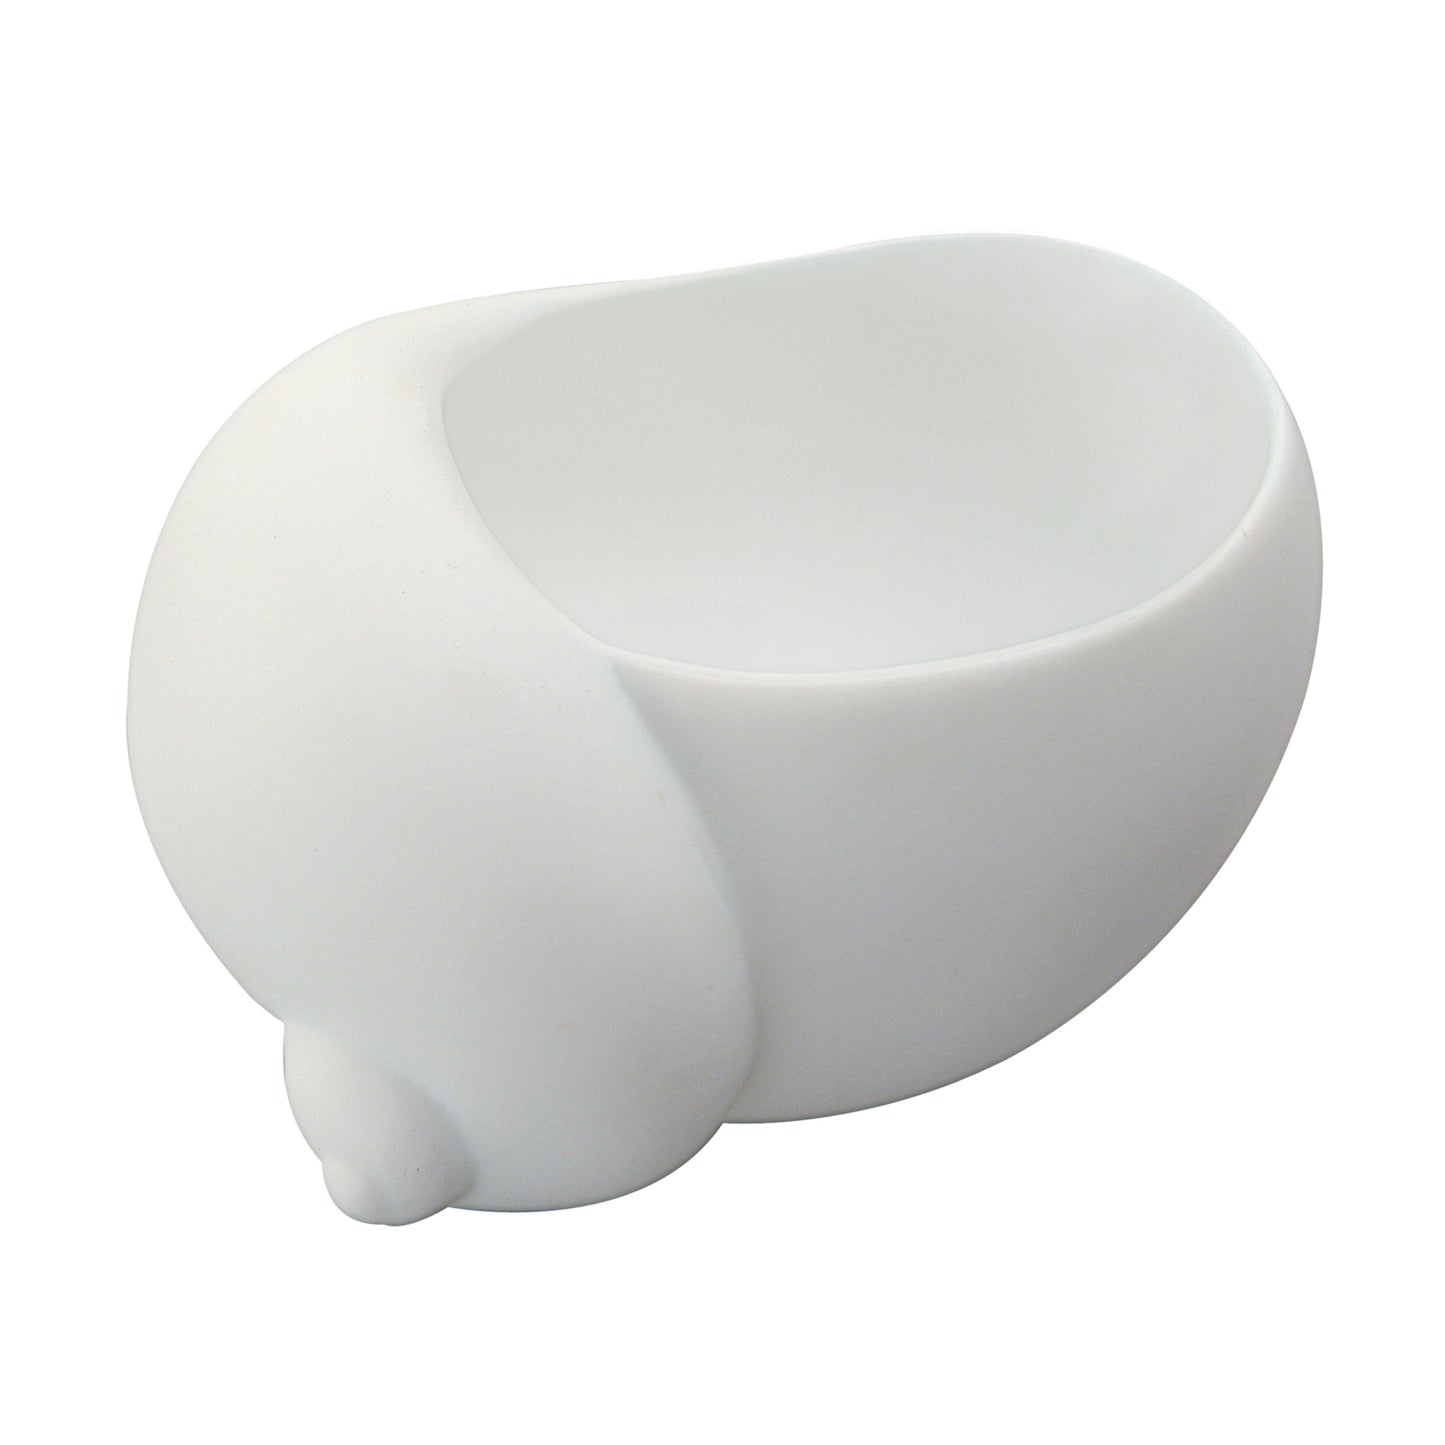 Nymphenburg White Salt Snail designed by Ted Muehling (1 pc.) (Germany)